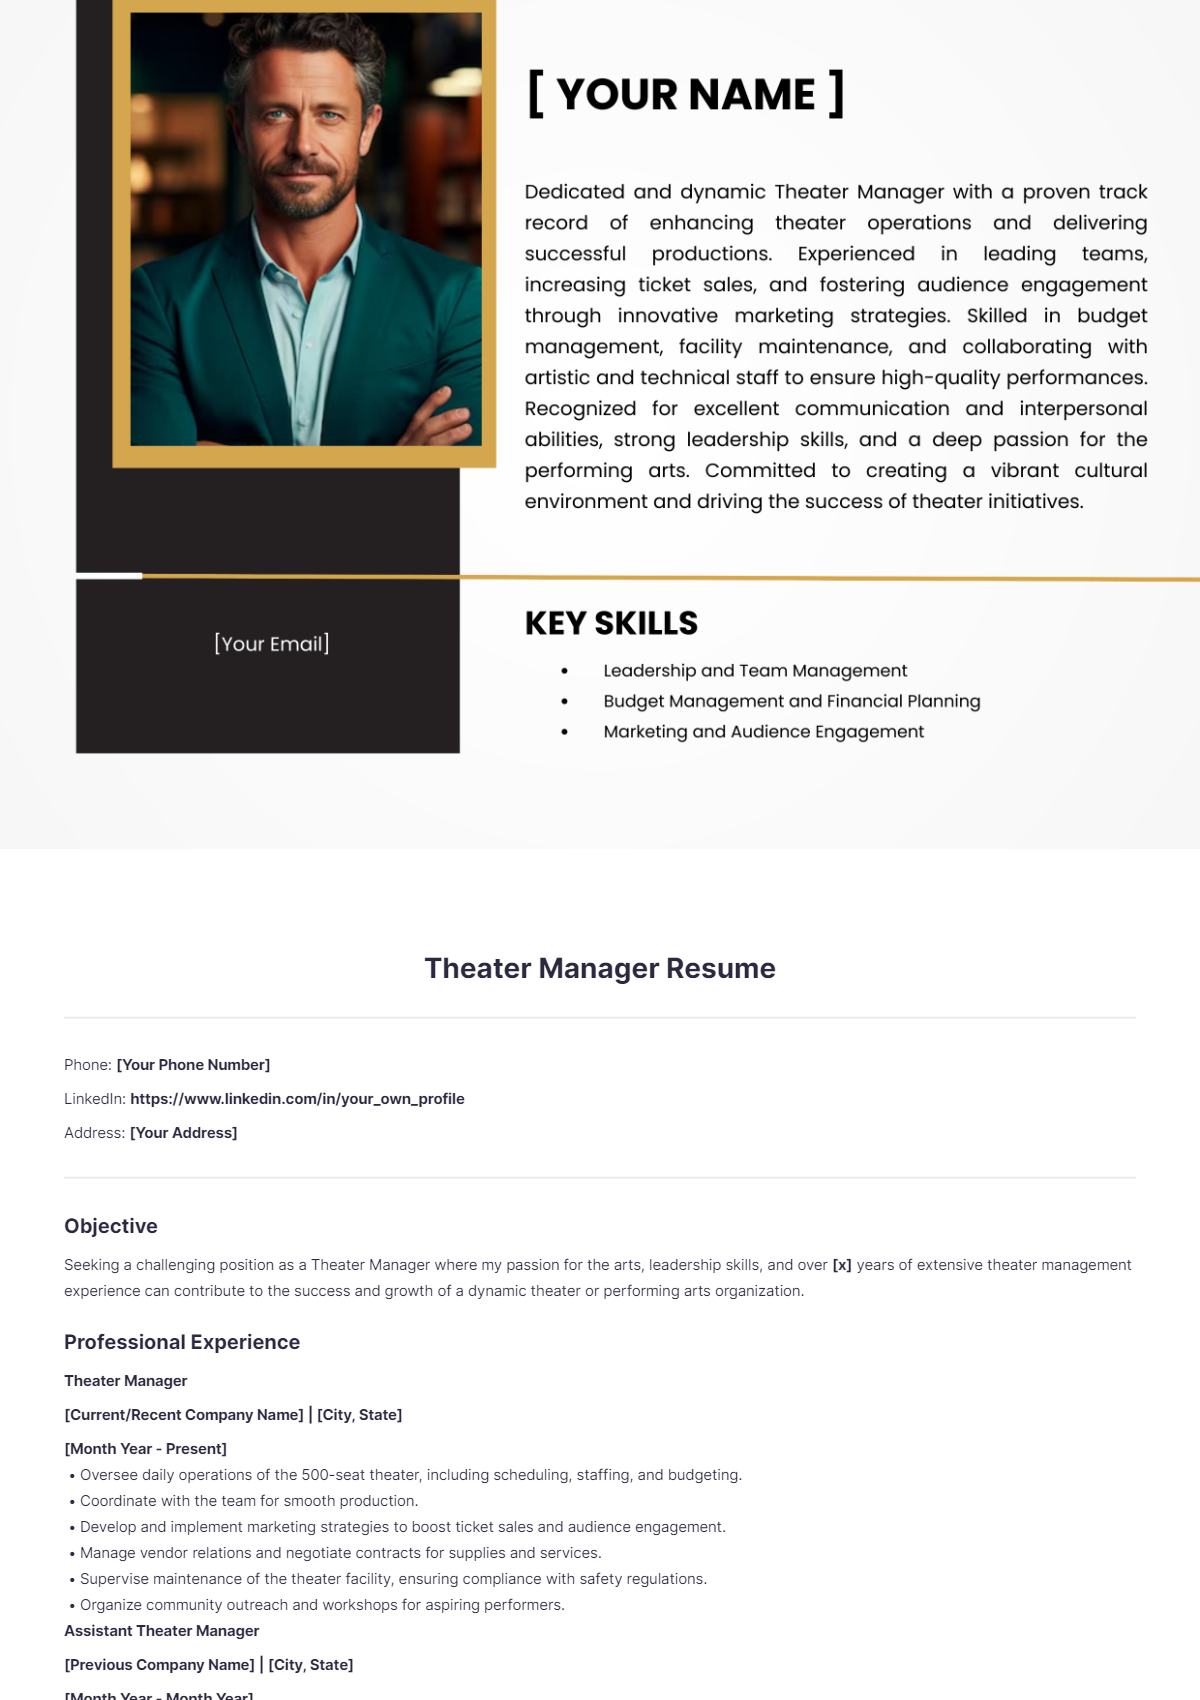 Theater Manager Resume Edit Online Download Example Template net